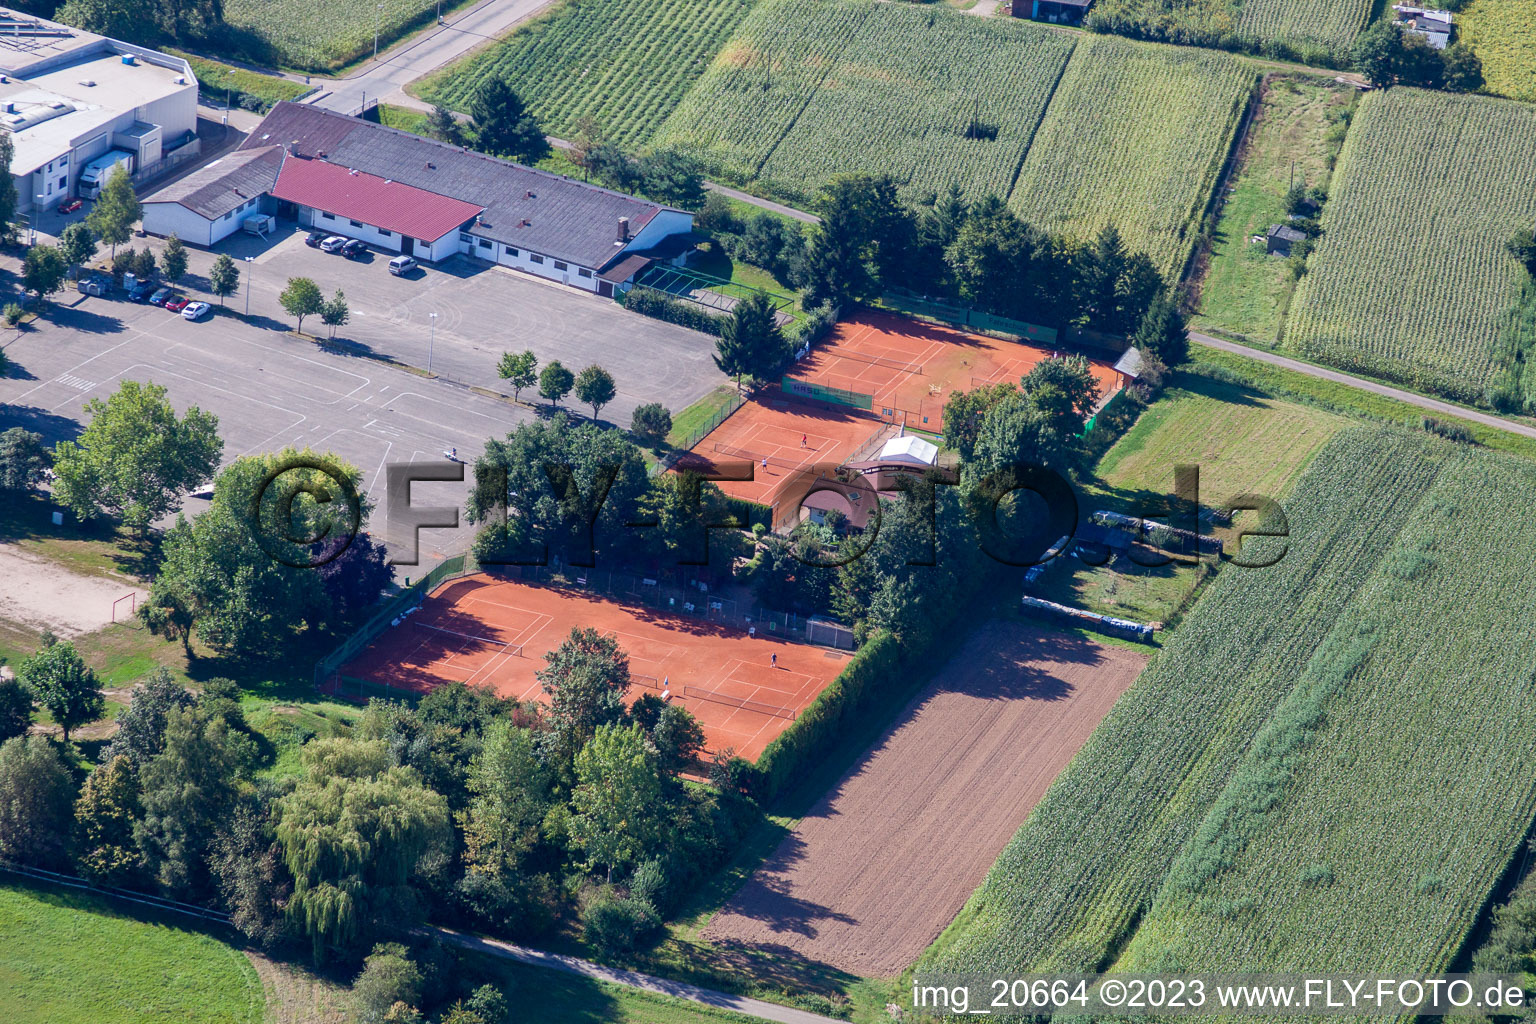 Aerial view of Tennis club in the district Urloffen in Appenweier in the state Baden-Wuerttemberg, Germany